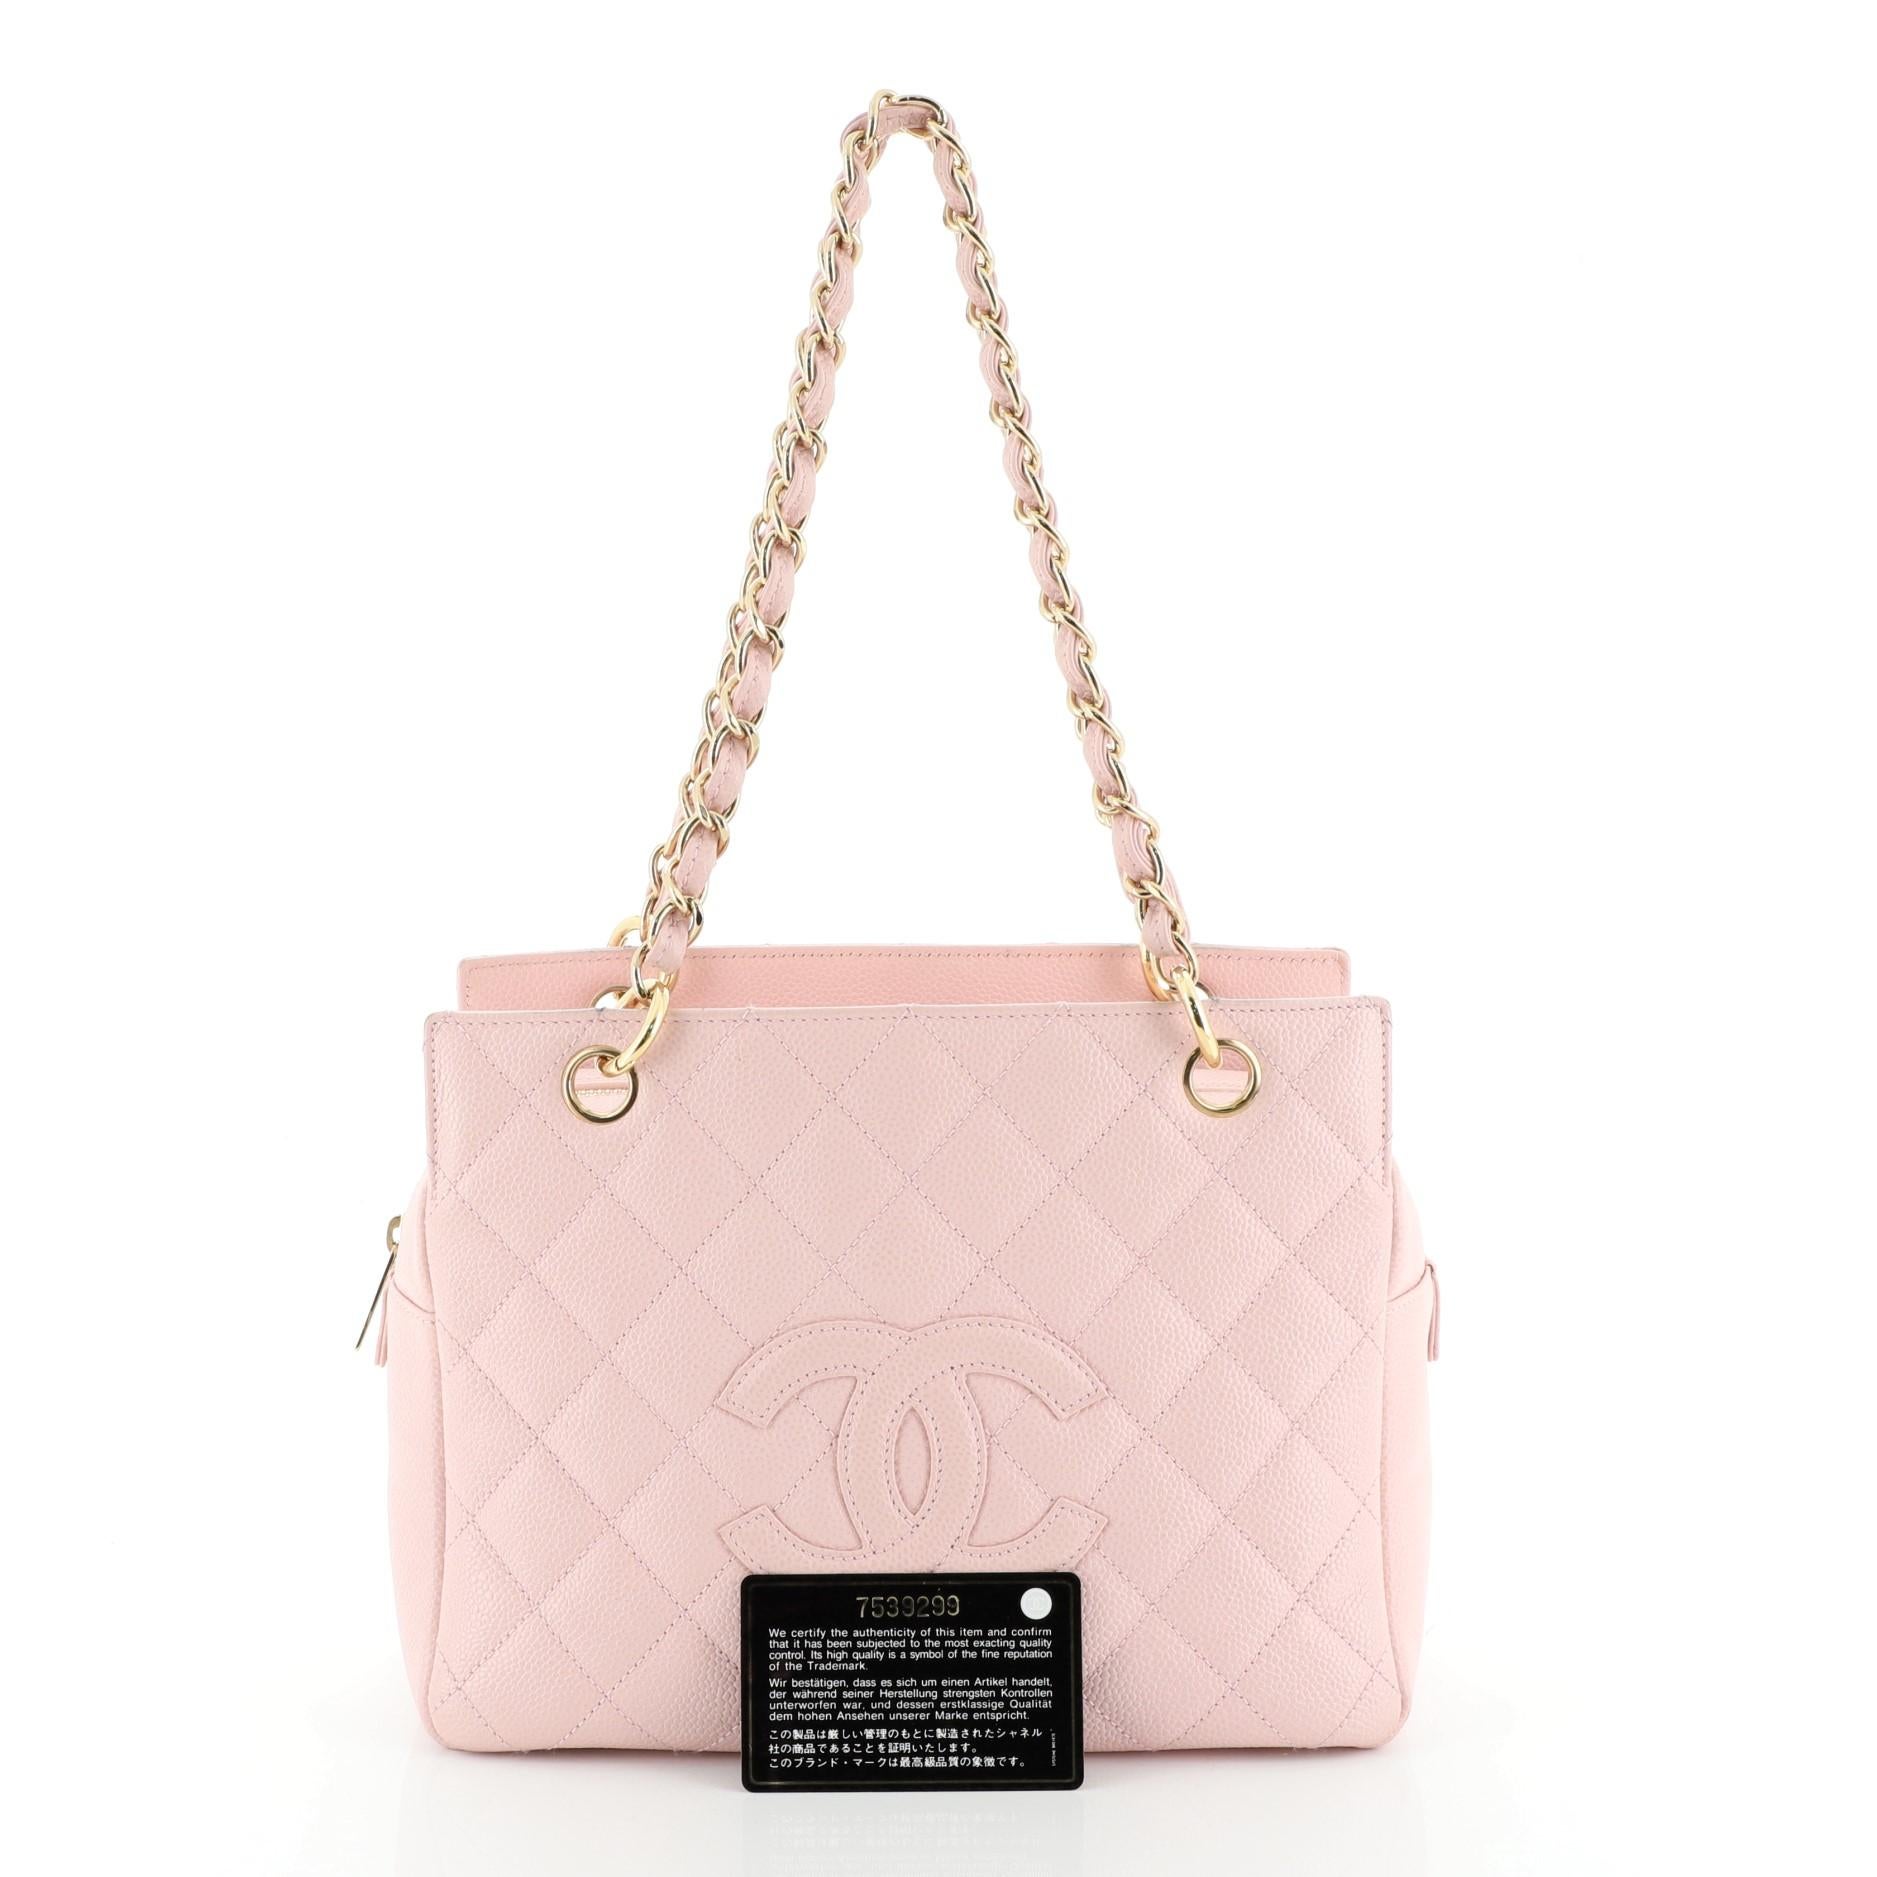 This Chanel Petite Timeless Tote Quilted Caviar, crafted in pink quilted caviar leather, features dual woven-in leather chain link straps, interlocking CC logo, and gold-tone hardware. Its zip closure opens to a pink leather interior with side zip